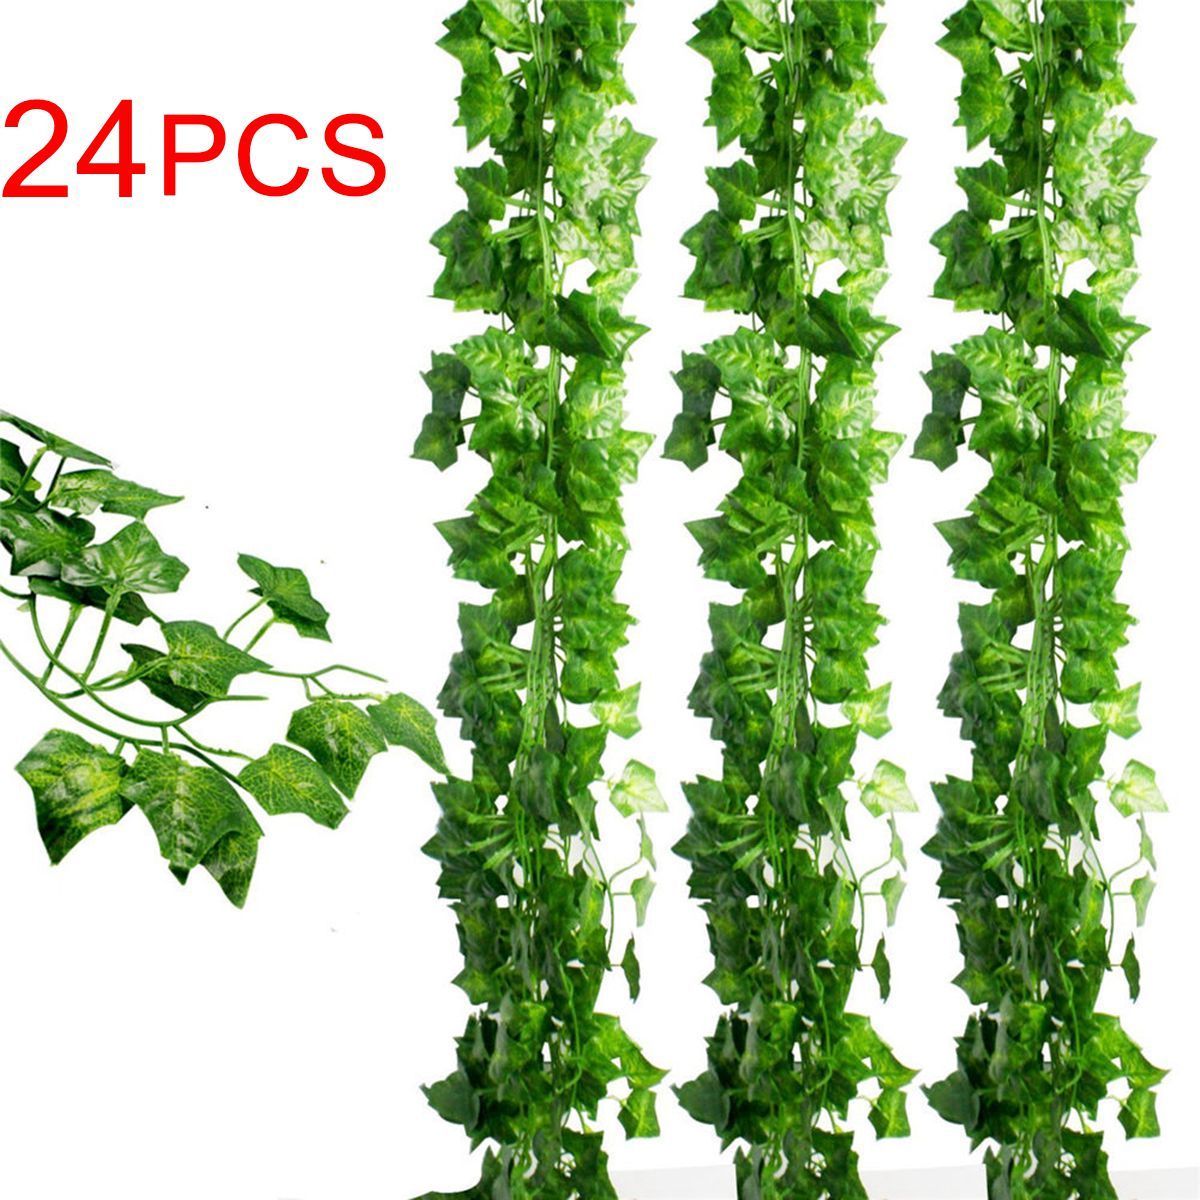 12pcs-Artificial-Greenery-Vine-Ivy-Leaves-Garland-Hanging-Wedding-Party-Garden-Decorations-1679234